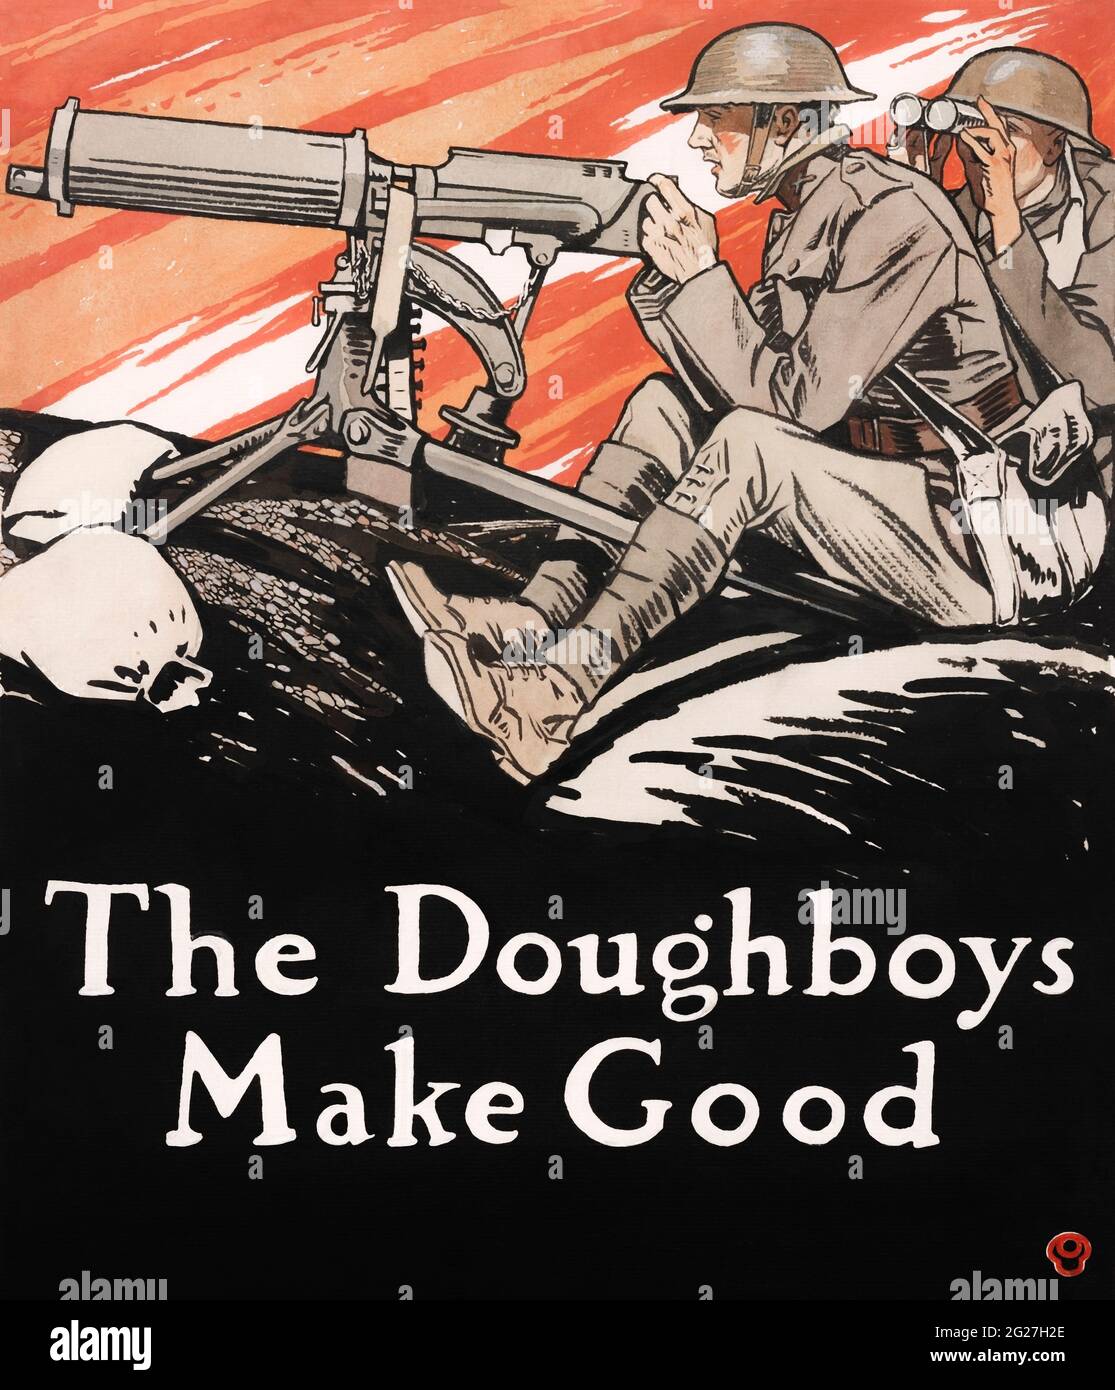 U.S. military history print of American soldiers on a stakeout with caption, The Doughboys Make Good. Stock Photo